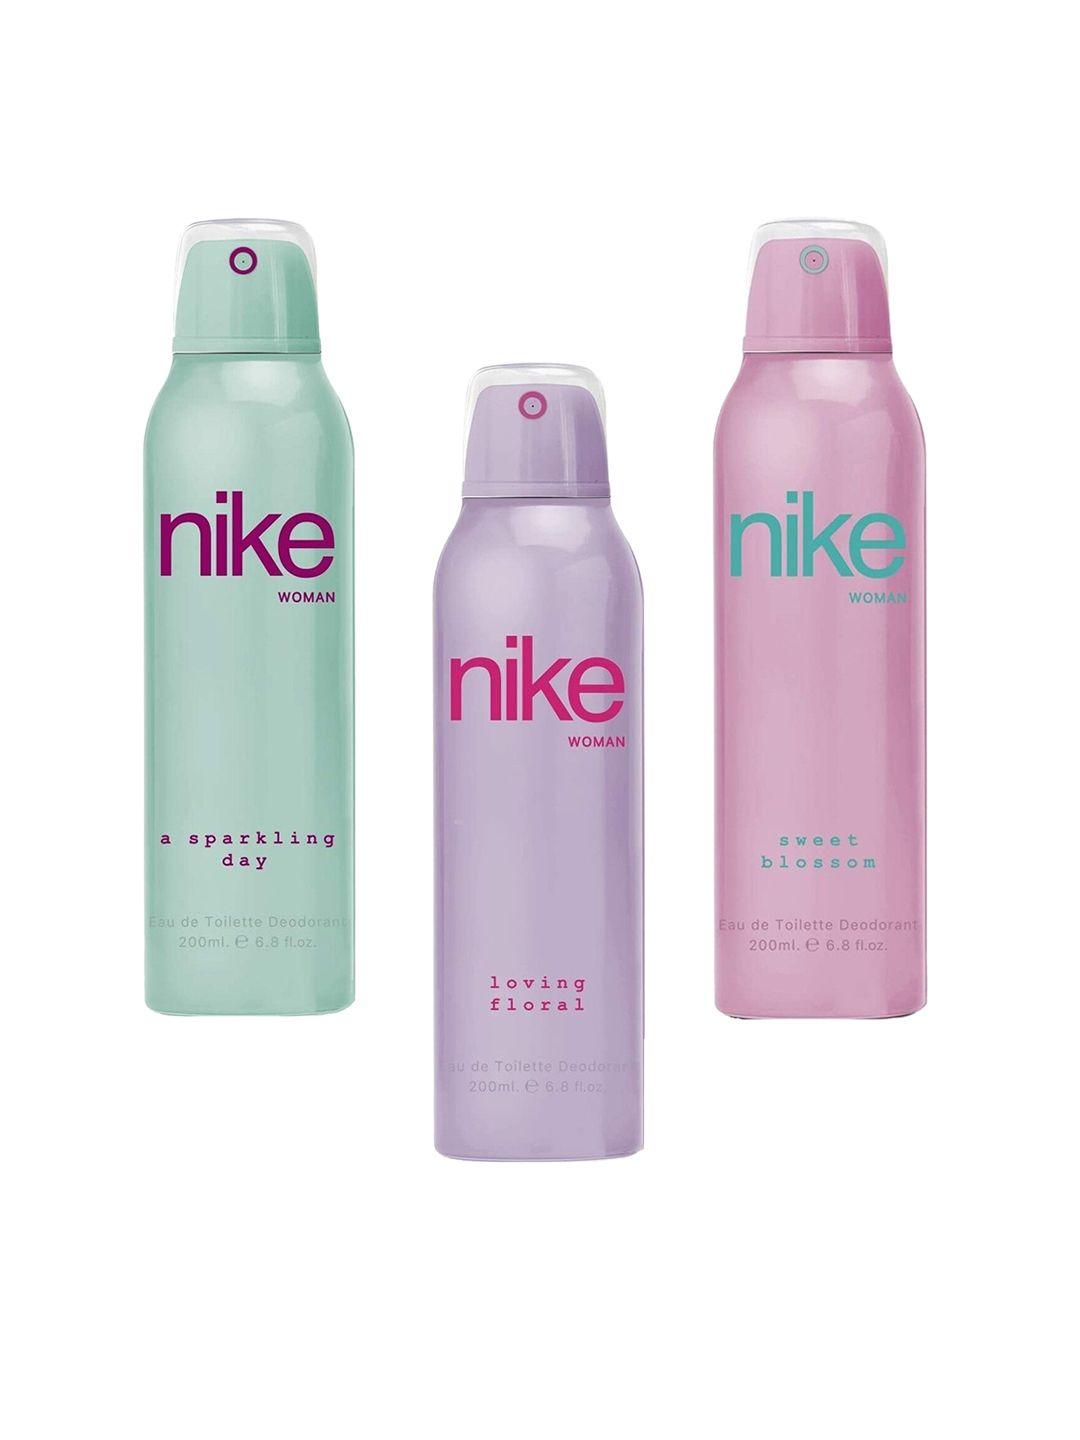 nike-pack-of-3-woman-a-sprakling-day,-loving-floral-&-sweet-blossom-deodorant--200ml-each